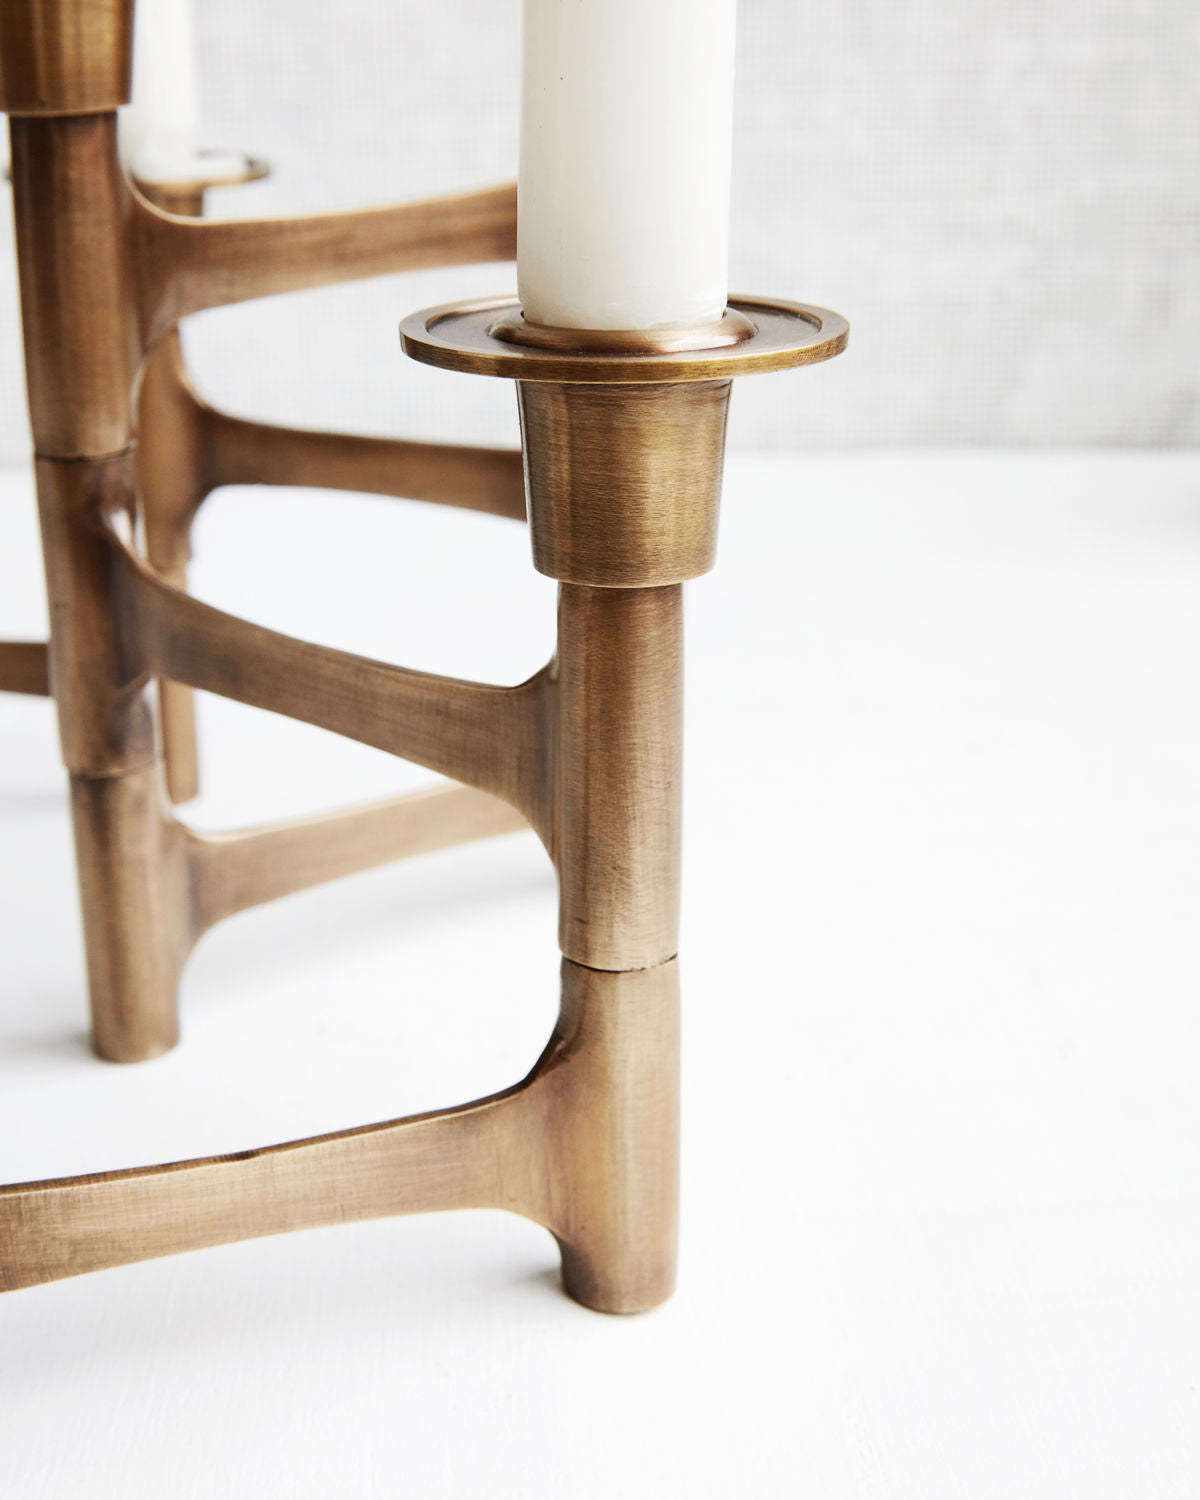 Move Candle Stand with 6 cups - Brass